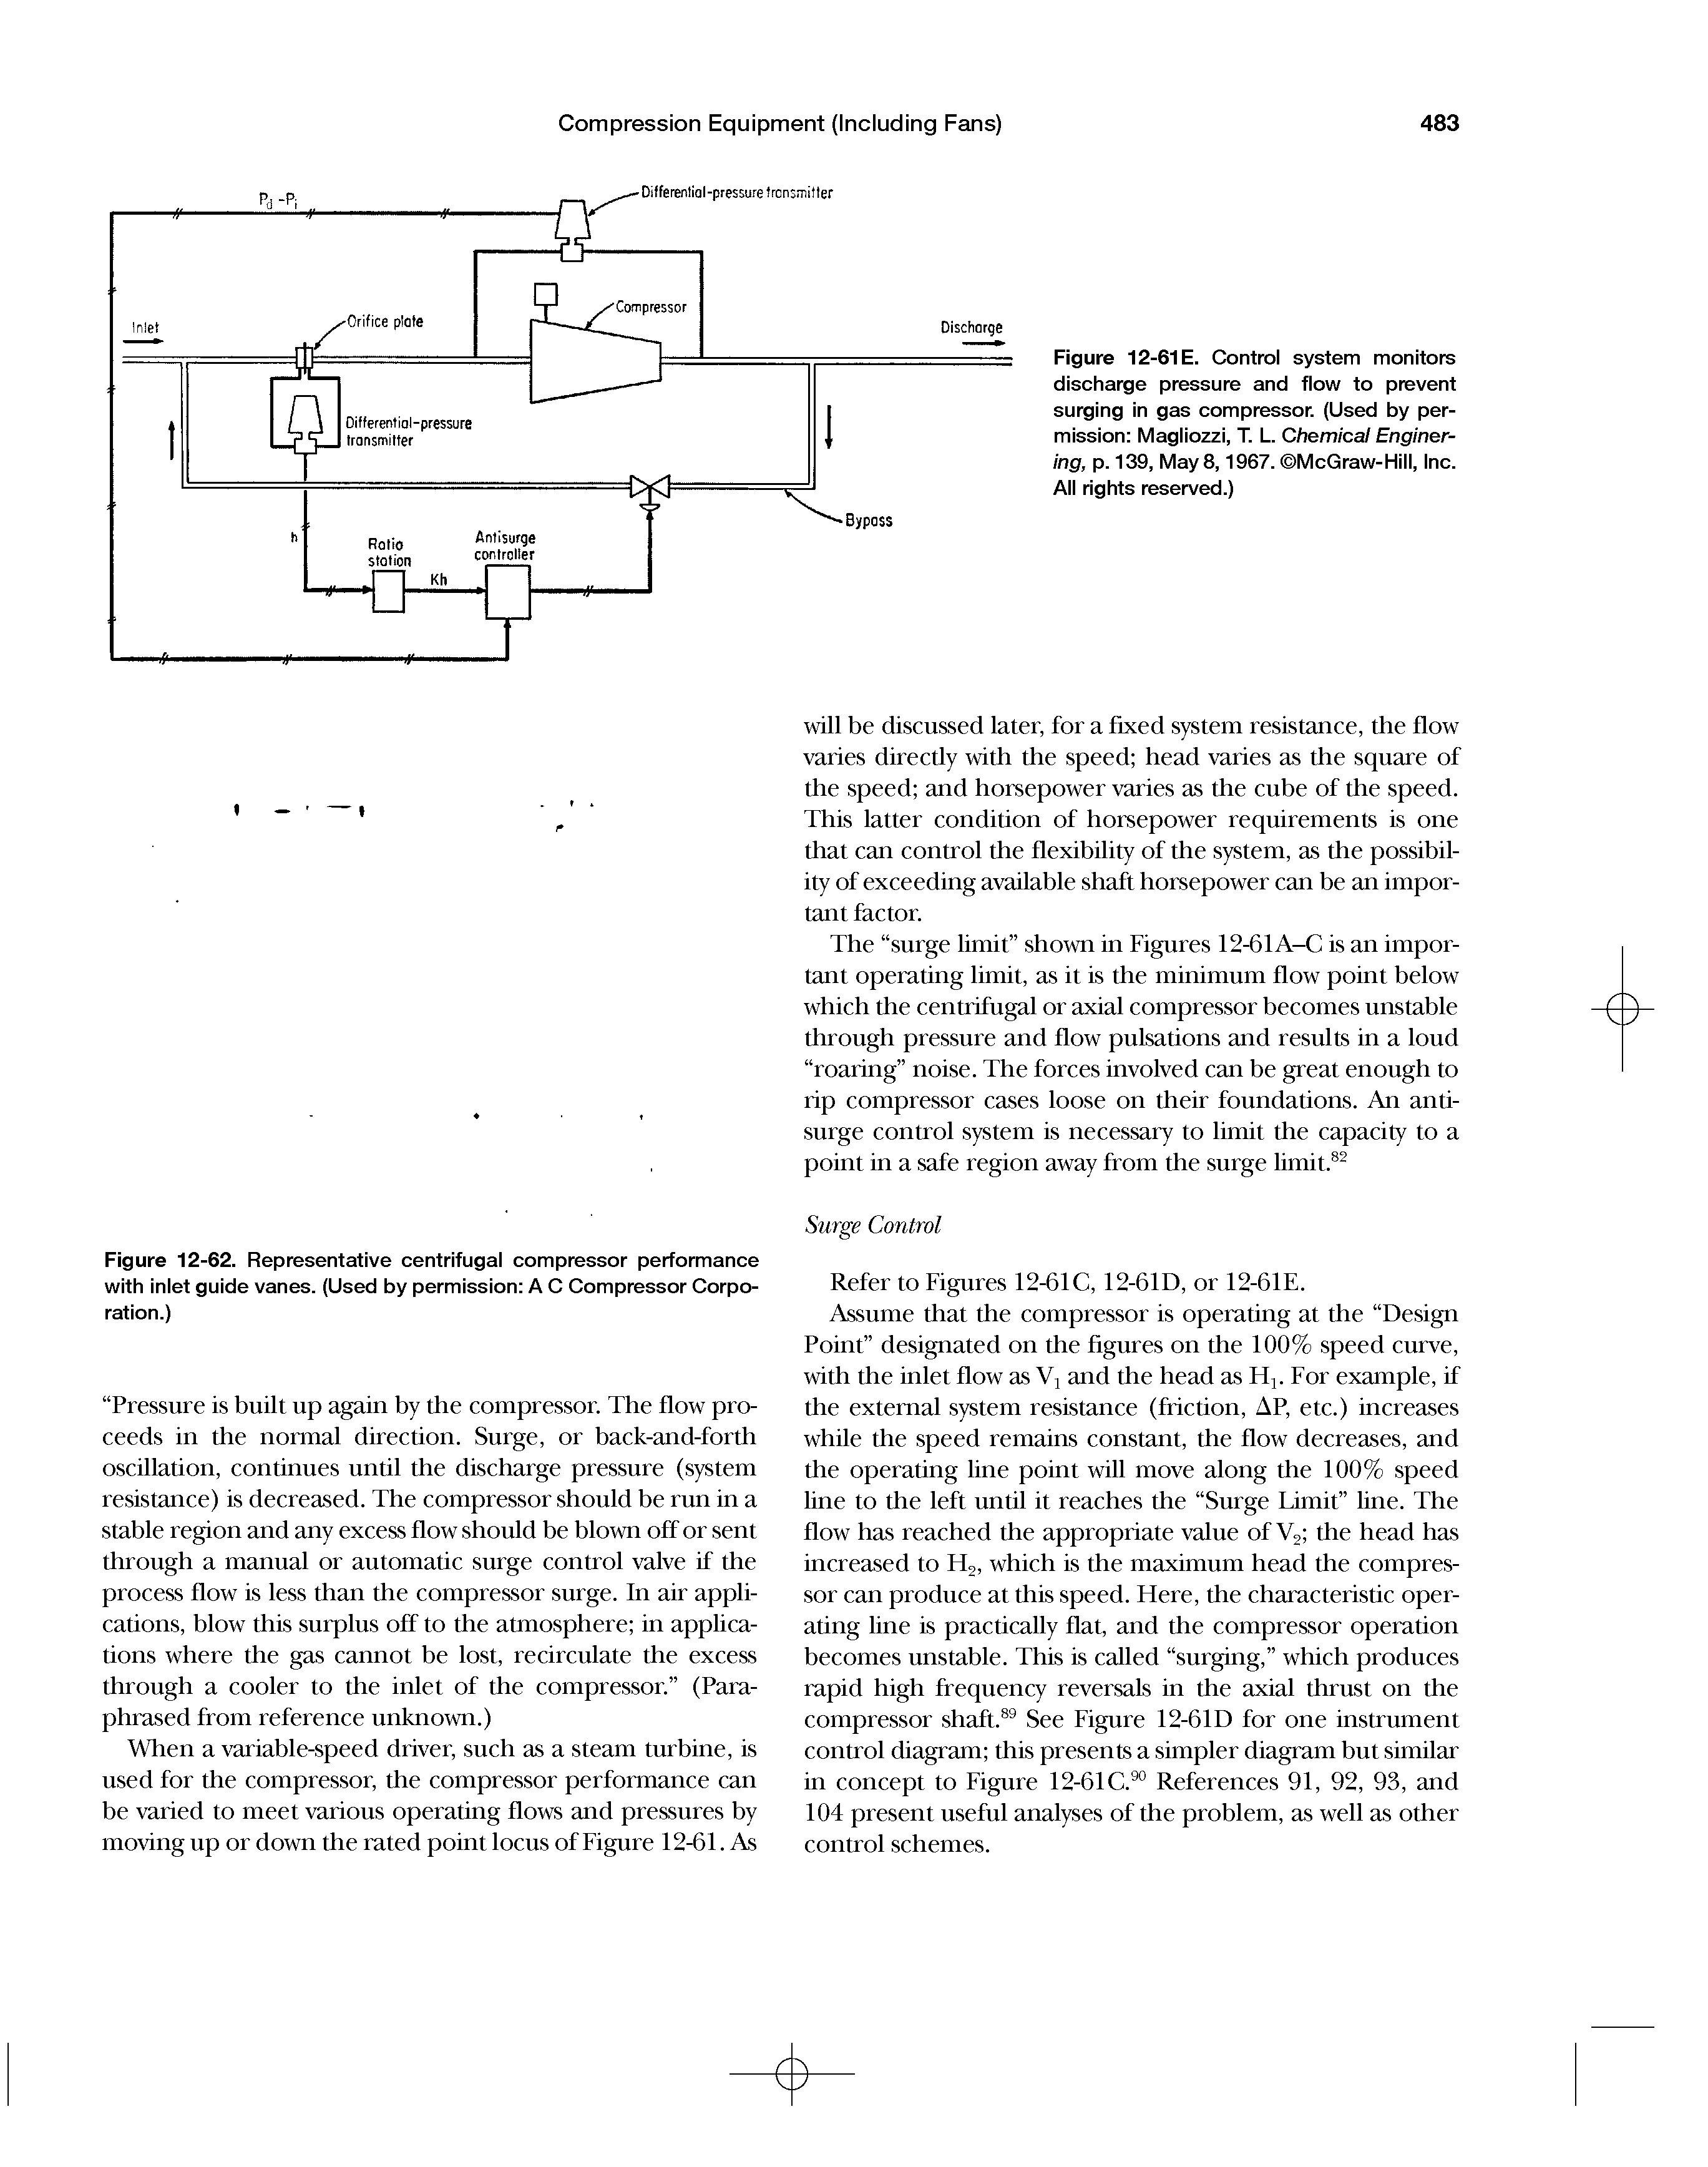 Figure 12-61E. Control system monitors discharge pressure and flow to prevent surging in gas compressor. (Used by permission Magliozzi, T. L. Chemical Enginering, p. 139, May 8,1967. McGraw-Hill, Inc. All rights reserved.)...